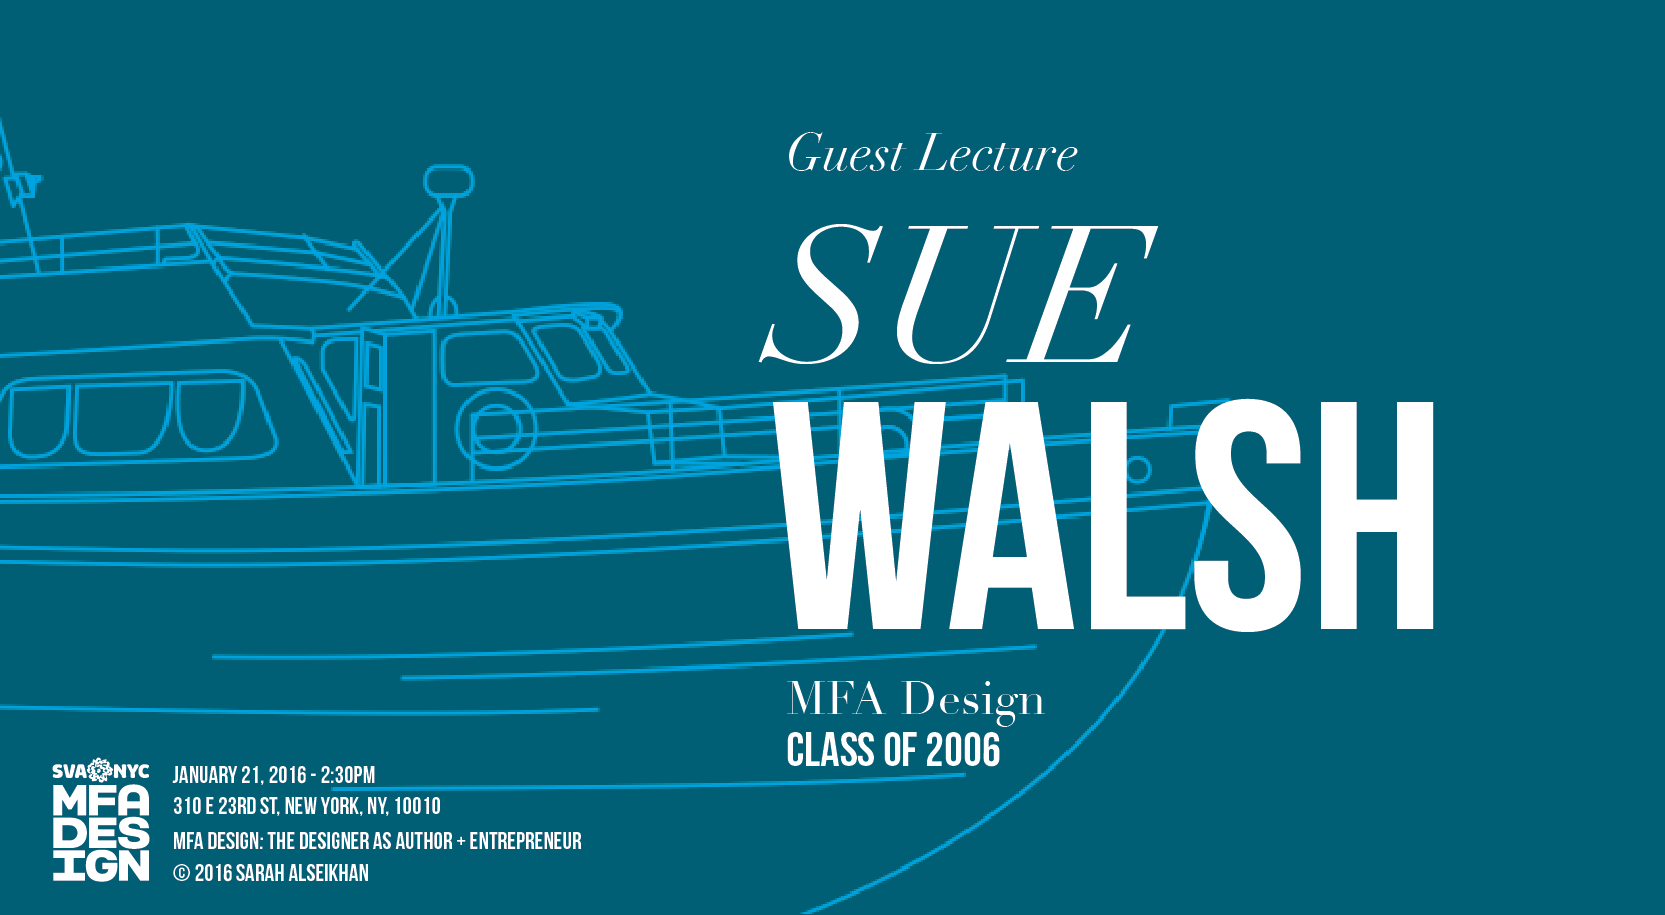 A blue poster with a cruise ship blueprint on it. Also there is the white text: Guest Lecture SUE WALSH. SVA NYC MFA Design logo.